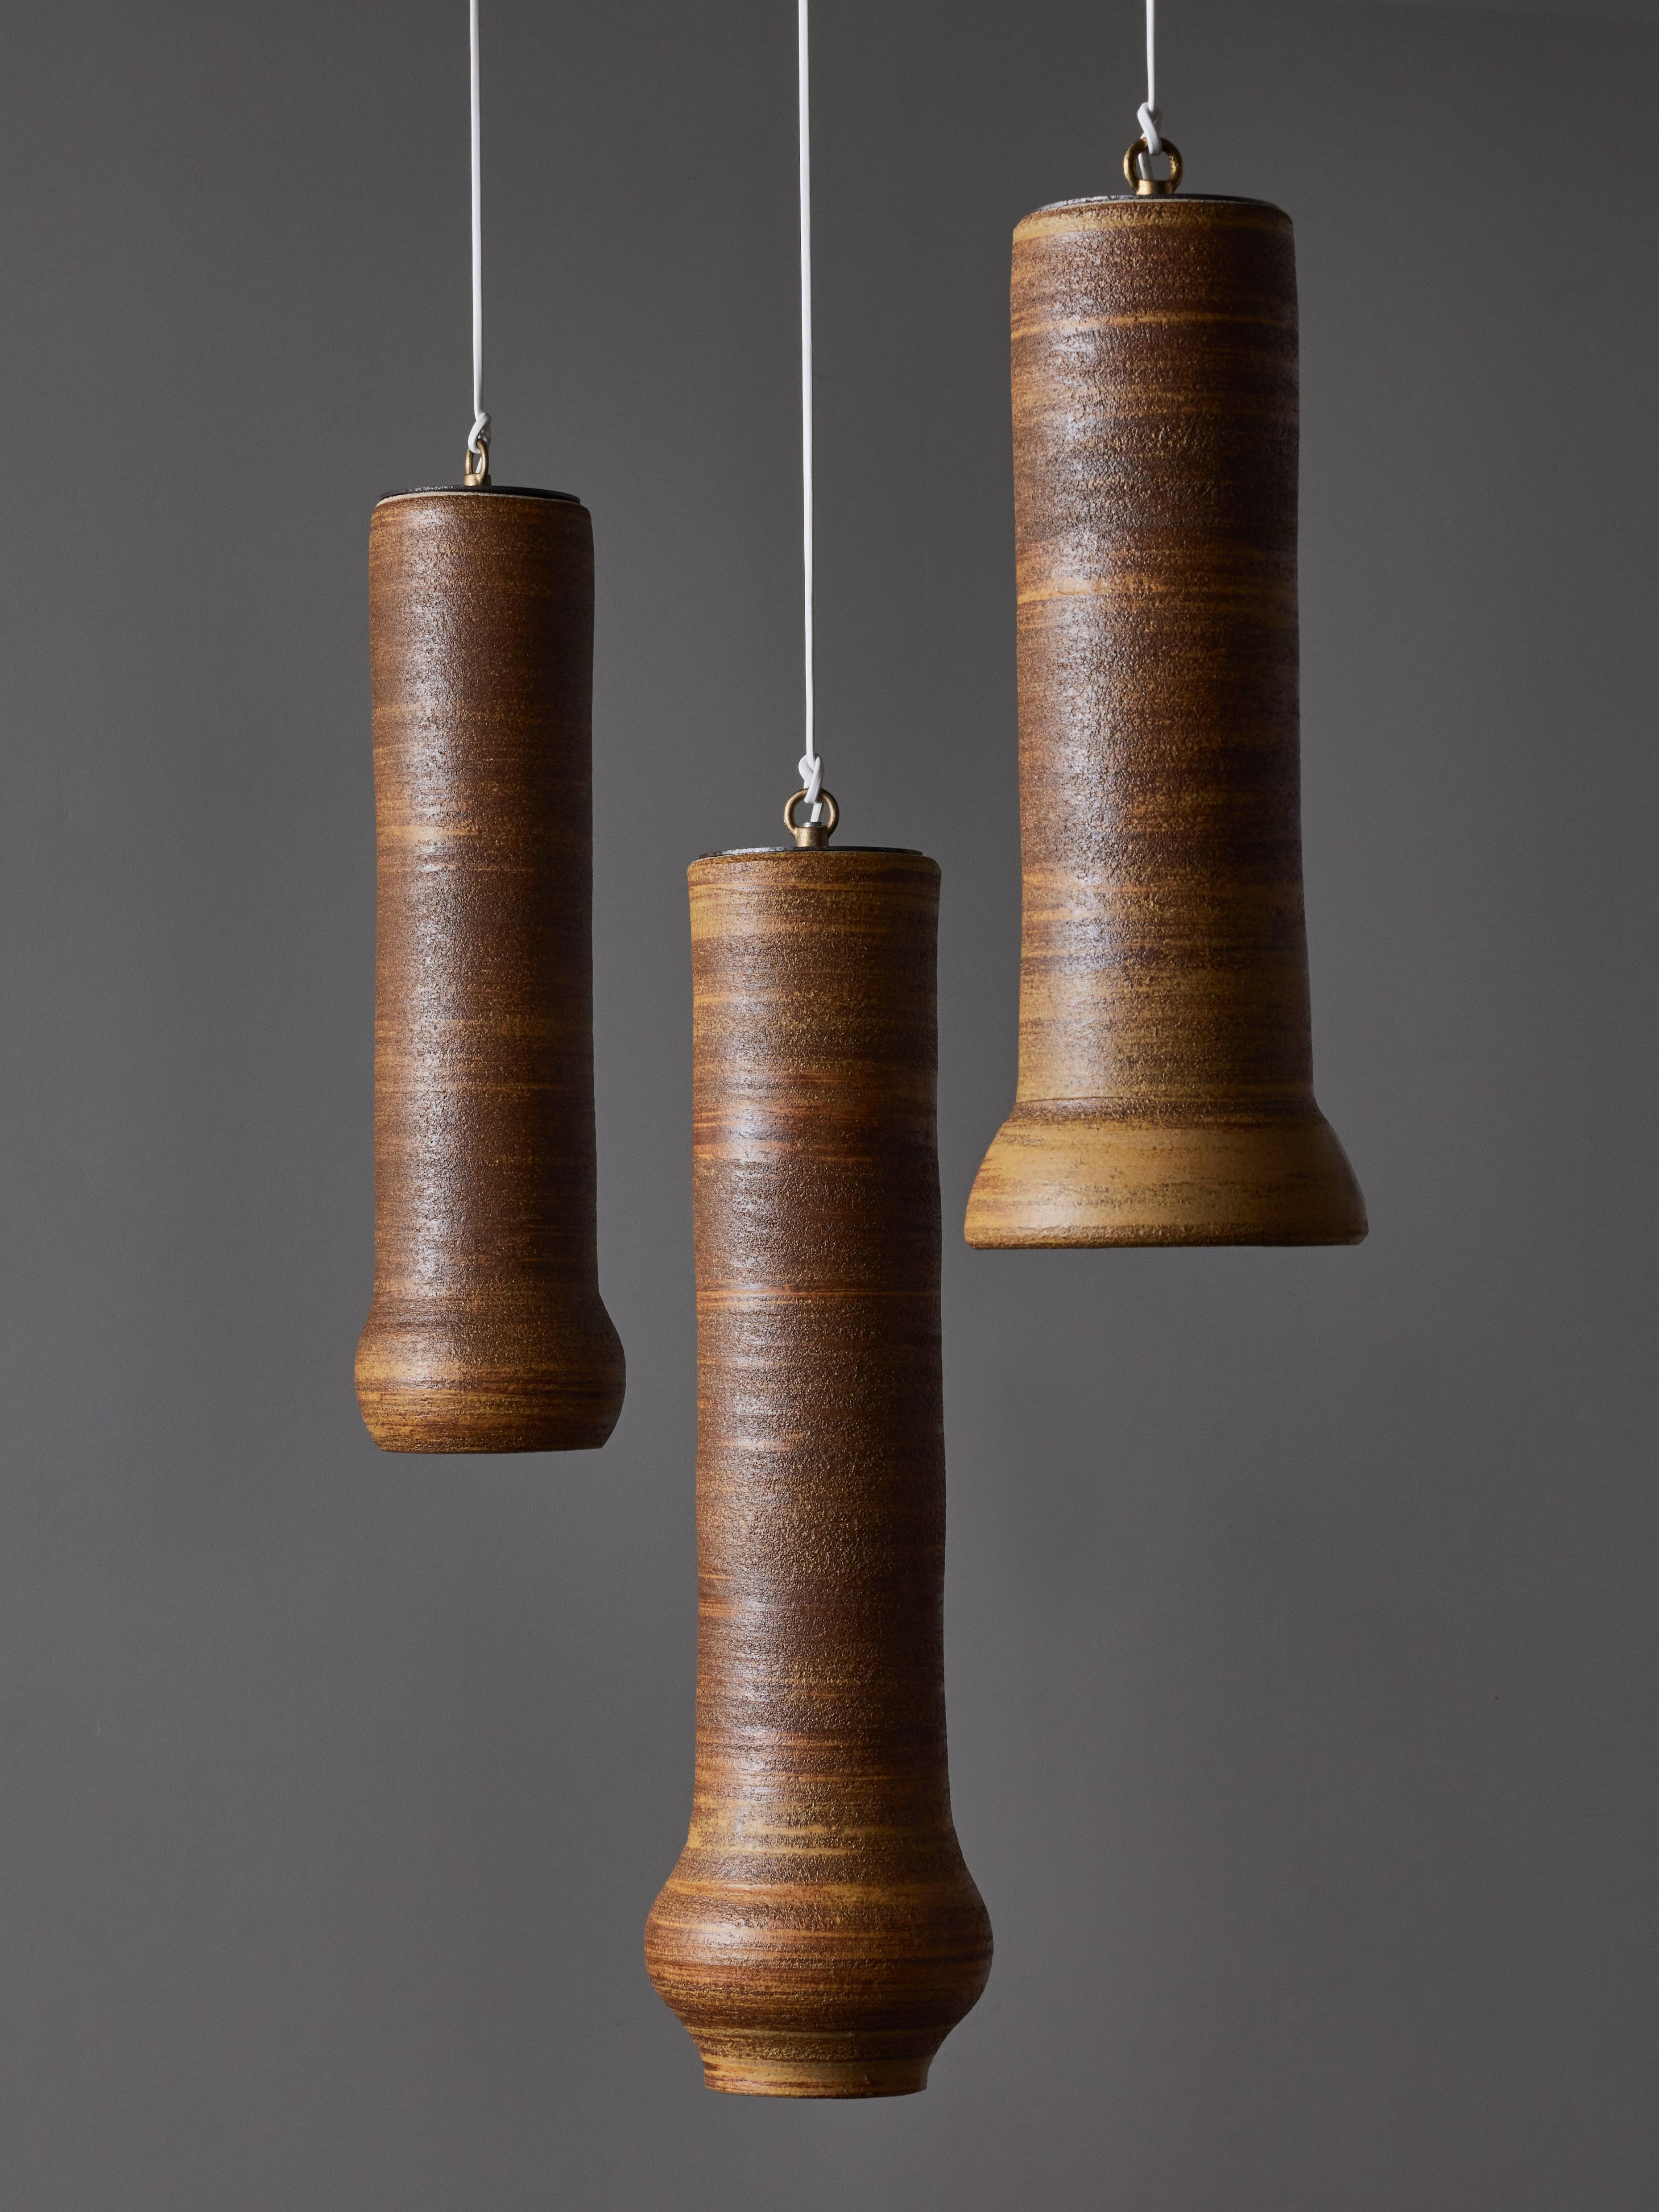 Set of three suspensions made of turned ceramic by the french artists Claude and Jean Bersoux.

Each suspension has a mat grainy finish in different shades of brown and beige on the outside and a glossy white finish inside helping reflecting the